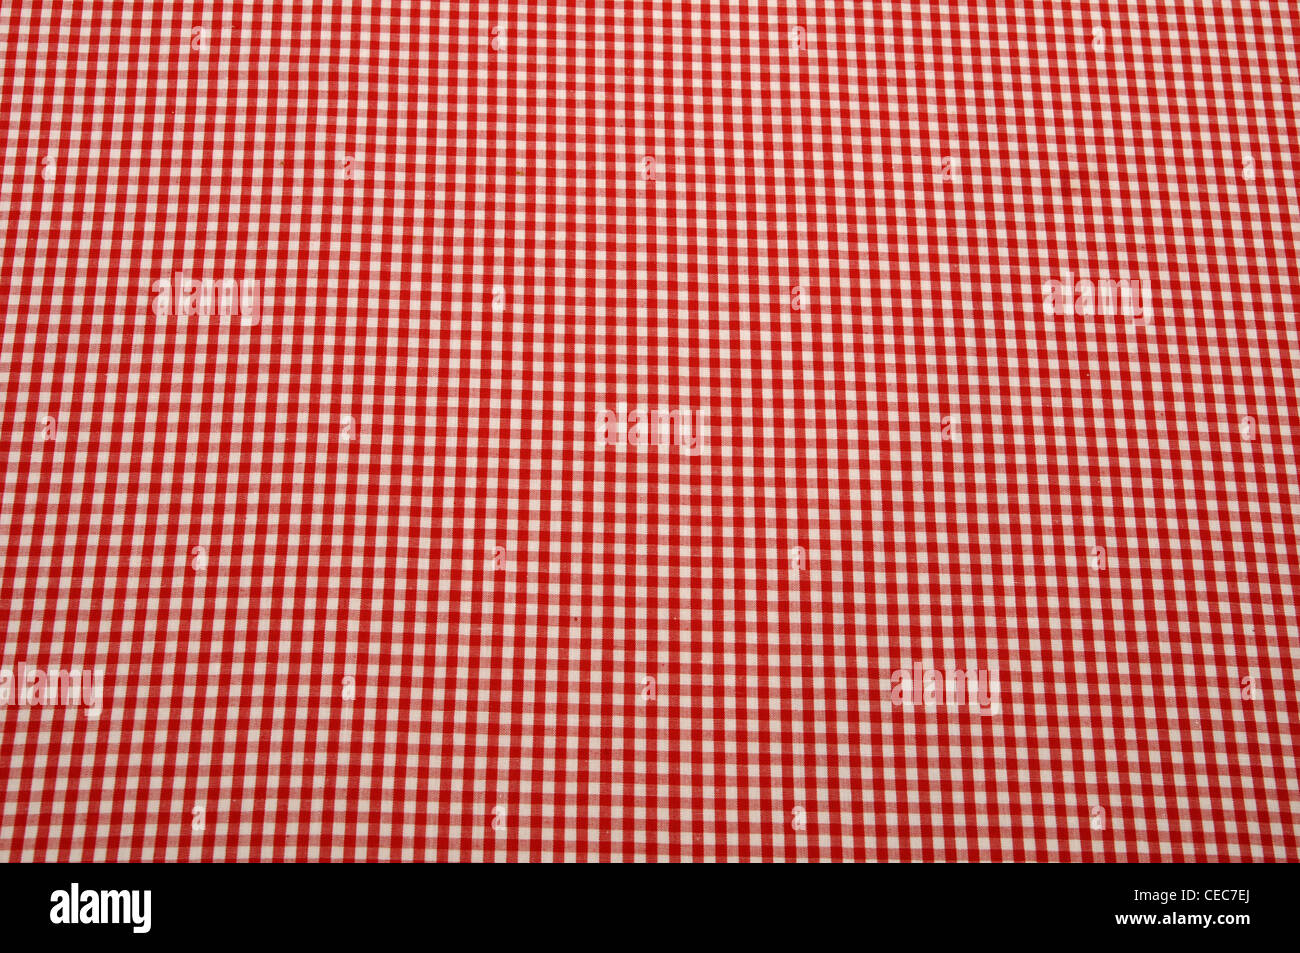 A red and white table cloth spread out and laying flat Stock Photo